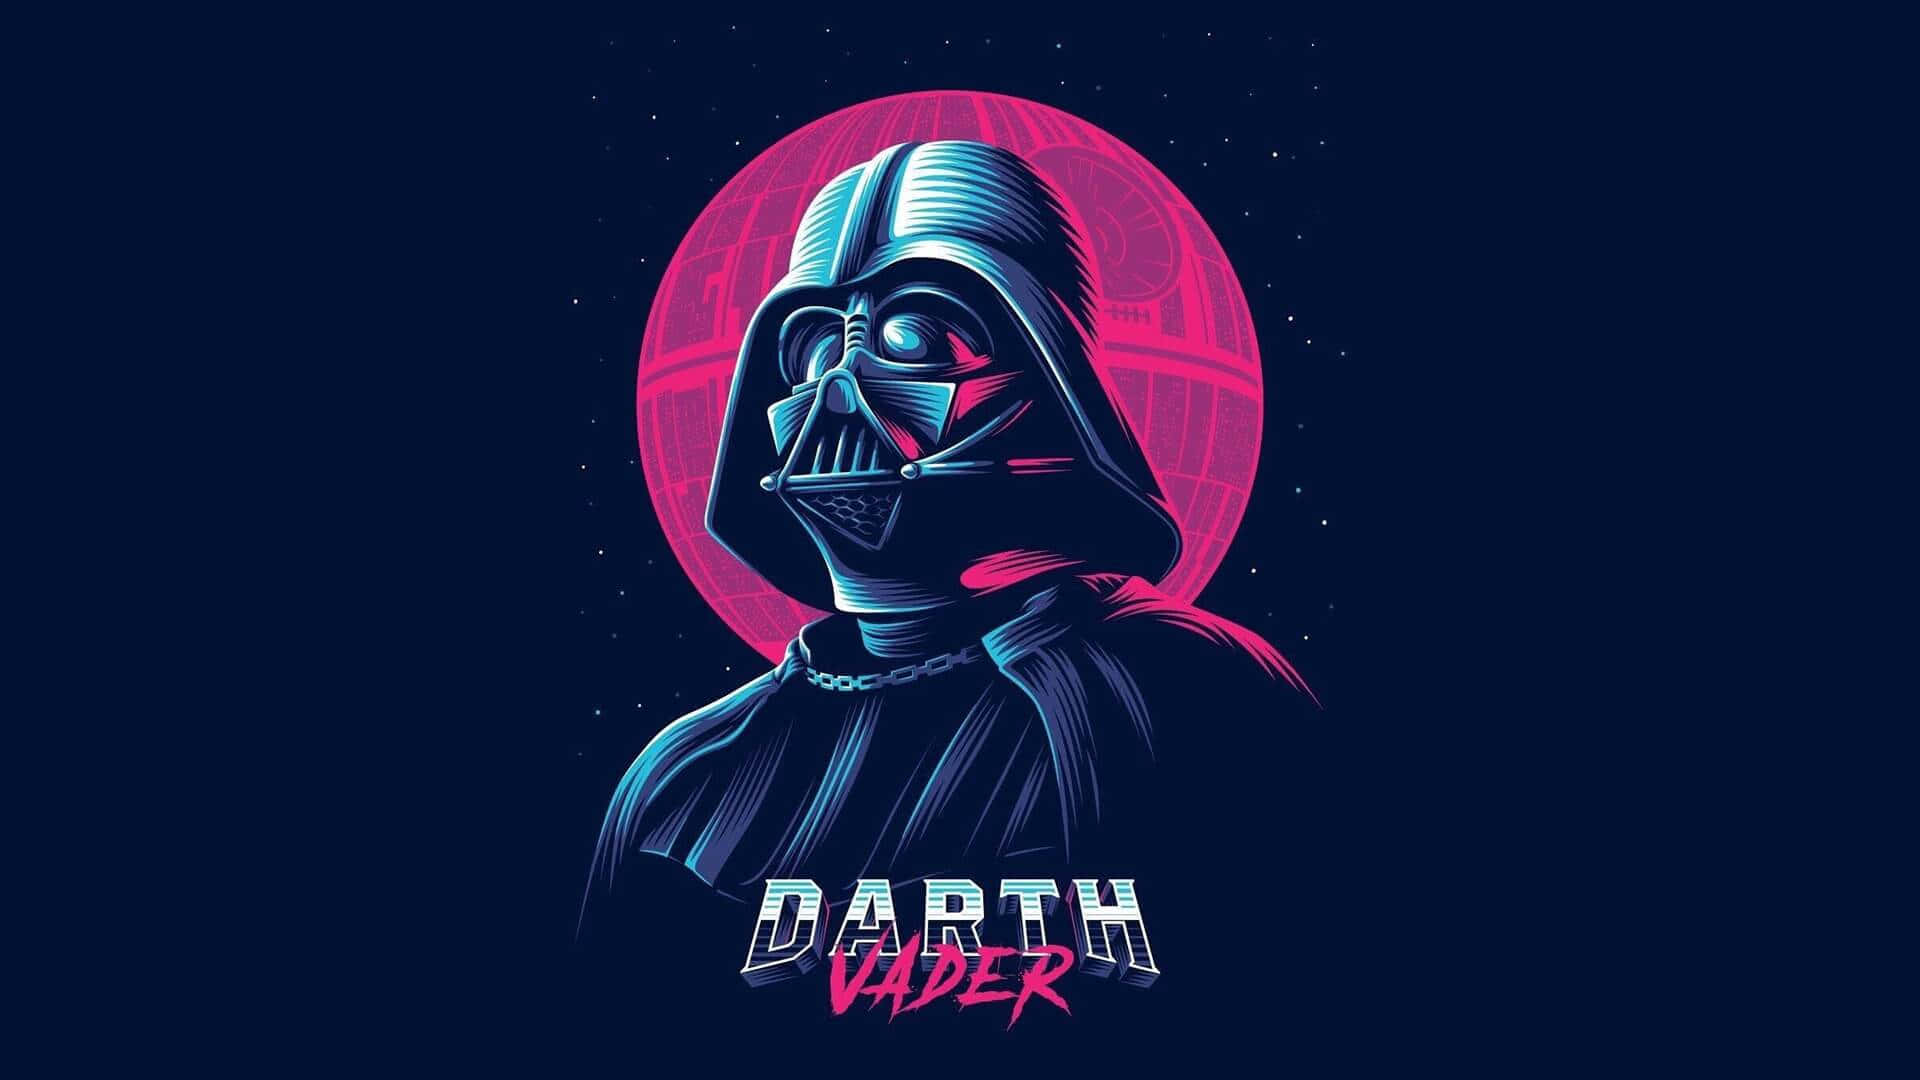 Feel the power of the dark side with Darth Vader